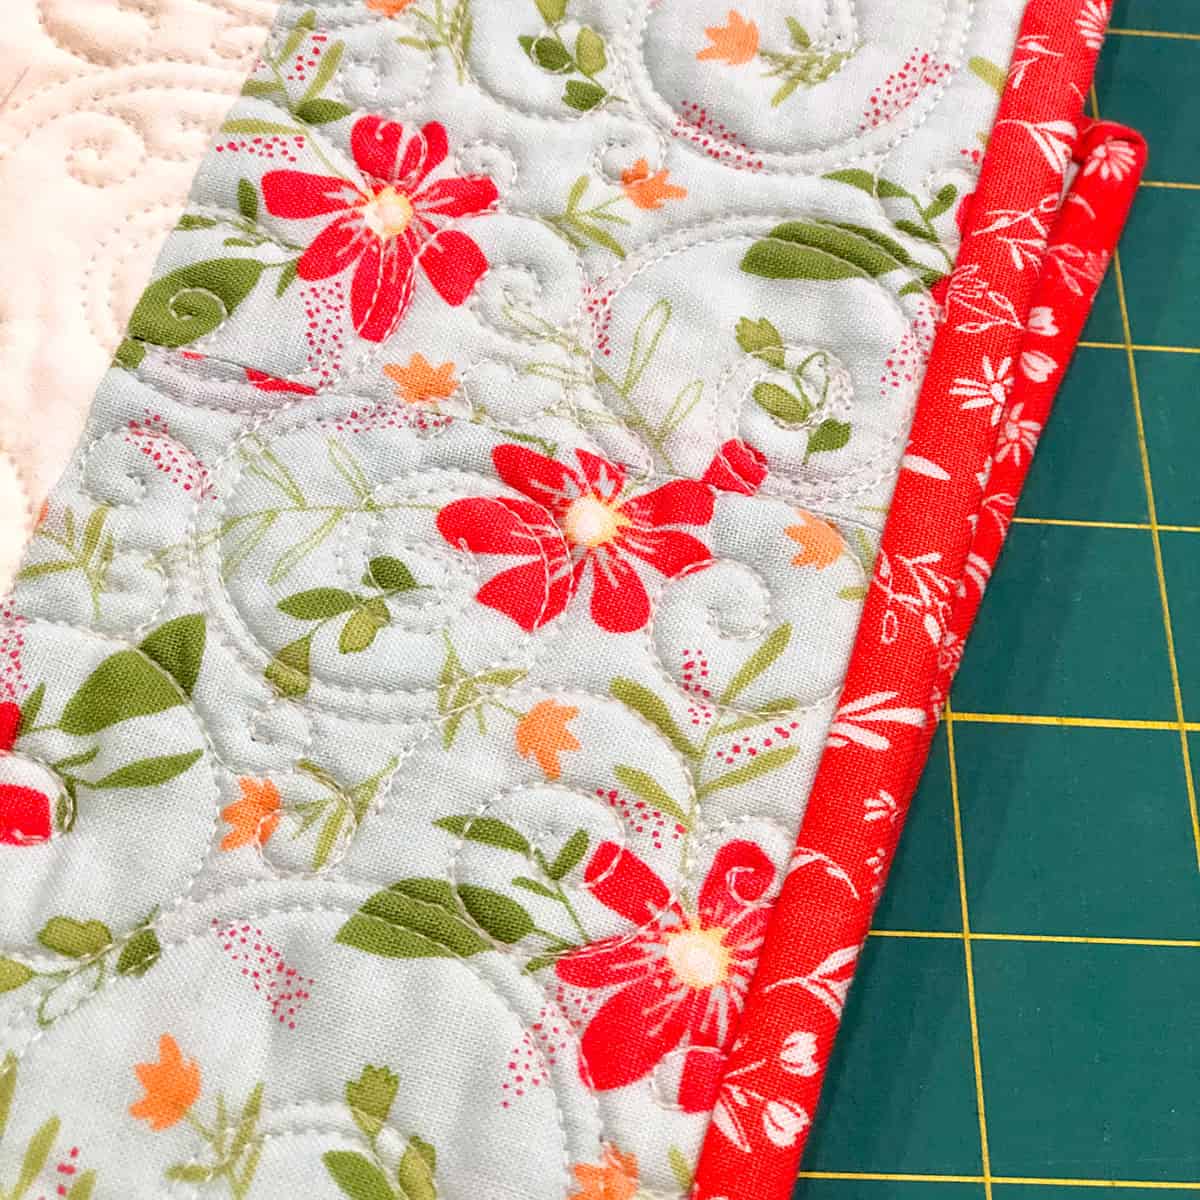 How to Sew Blanket Binding on a Flannel Baby Blanket Tutorial  Satin blanket  binding tutorial, Sewing hacks, Satin blanket binding